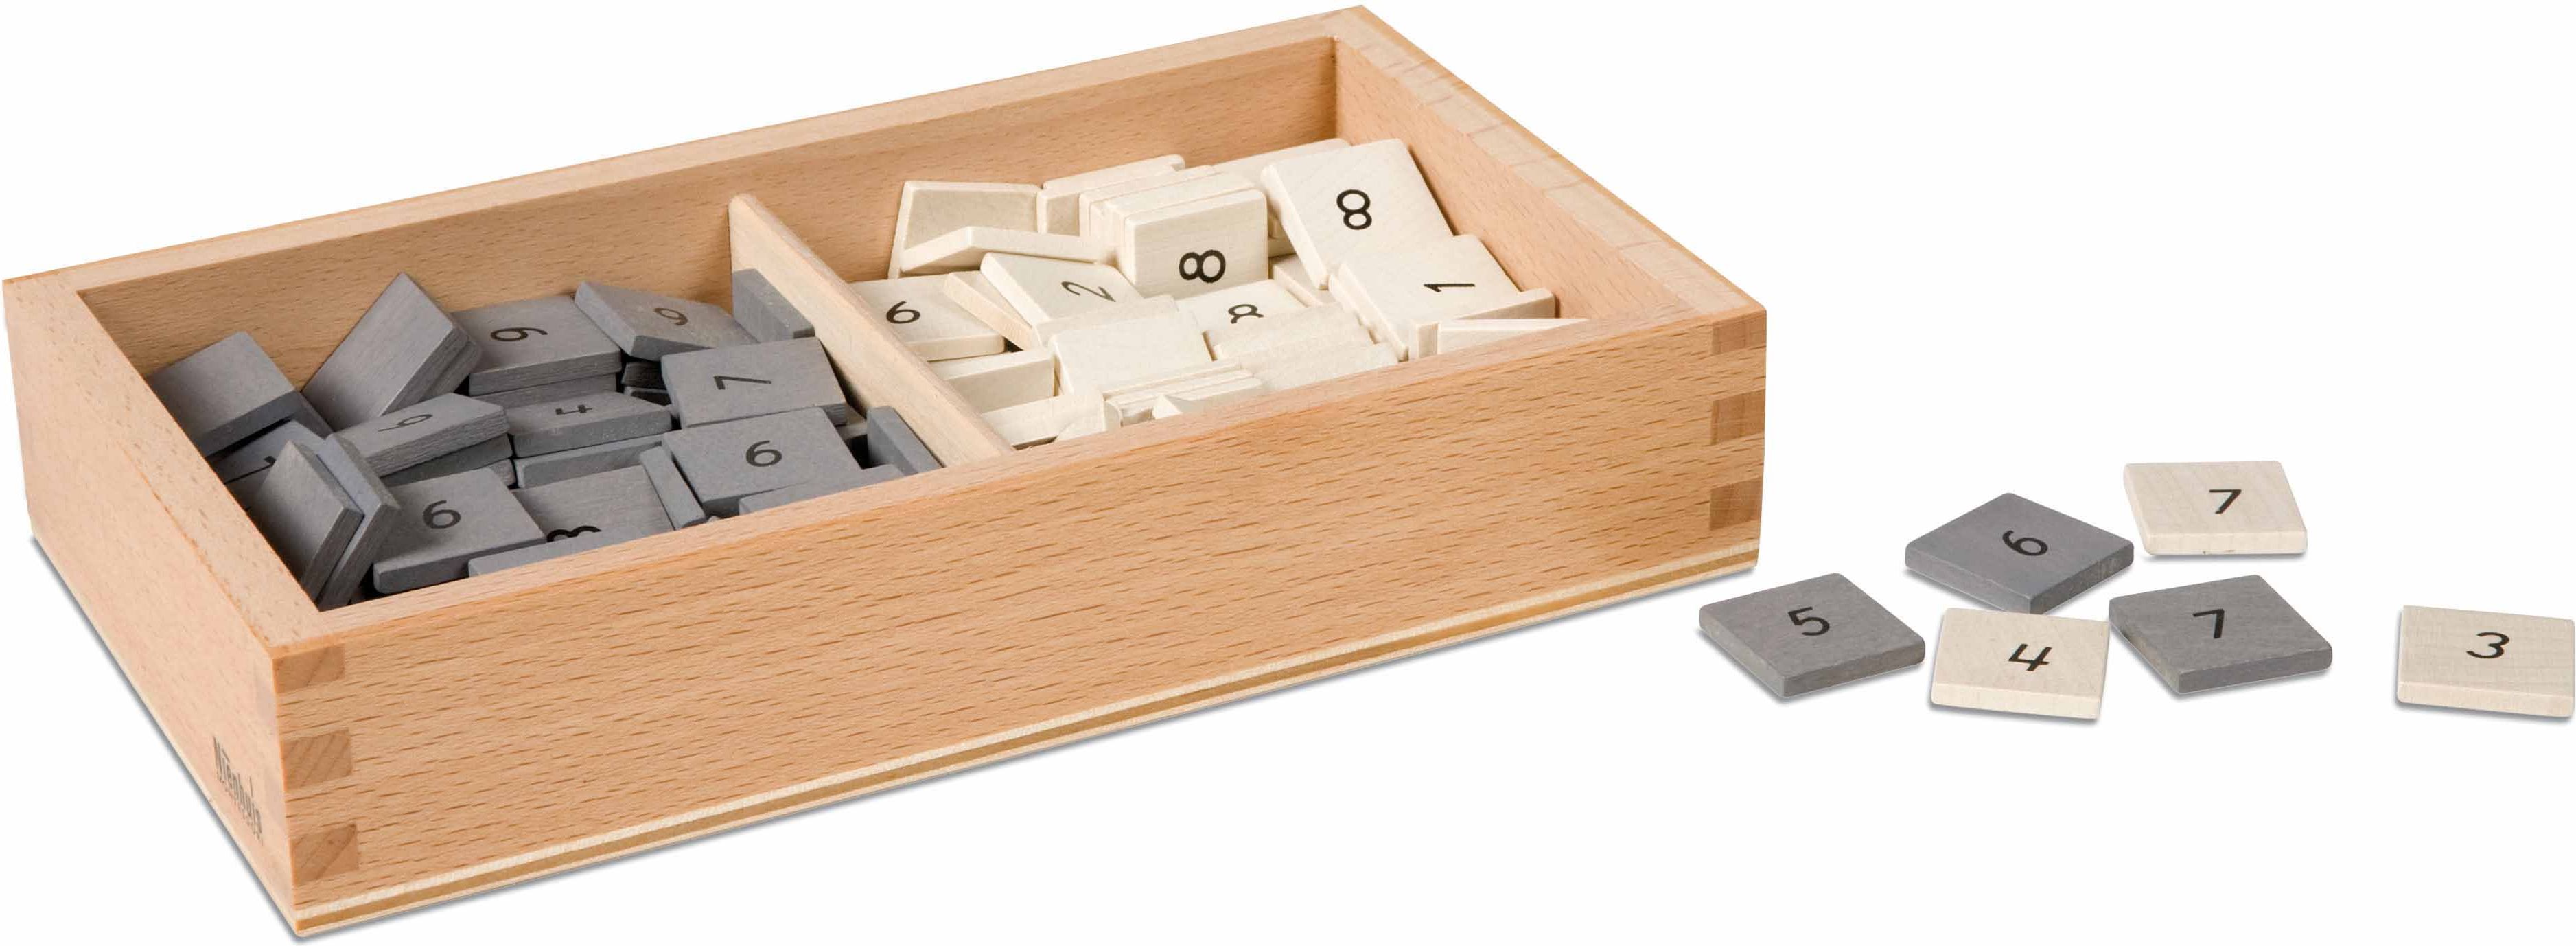 Nienhuis Montessori Box With Gray And White Number Tiles - obrázek 1